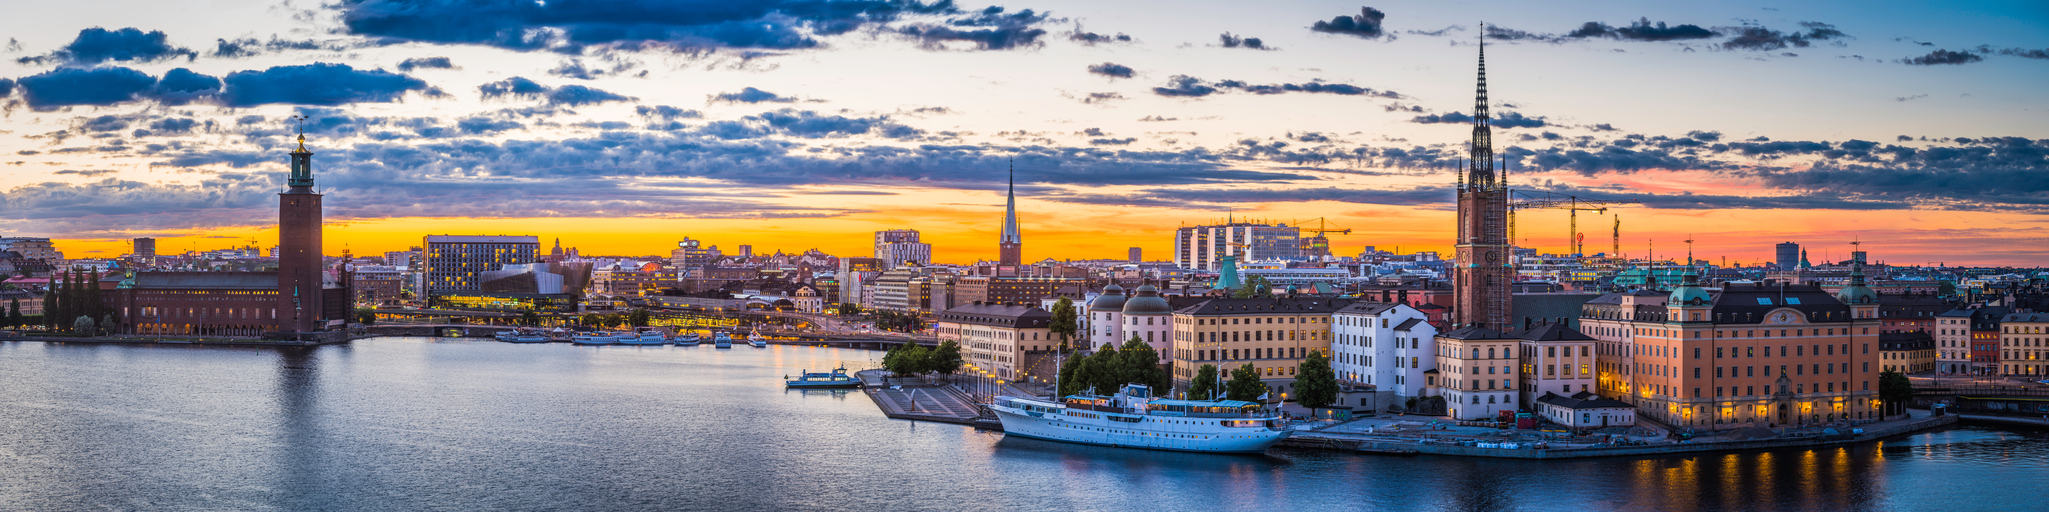 Stockholm sunset spires City Hall illuminated waterfront cityscape panorama Sweden